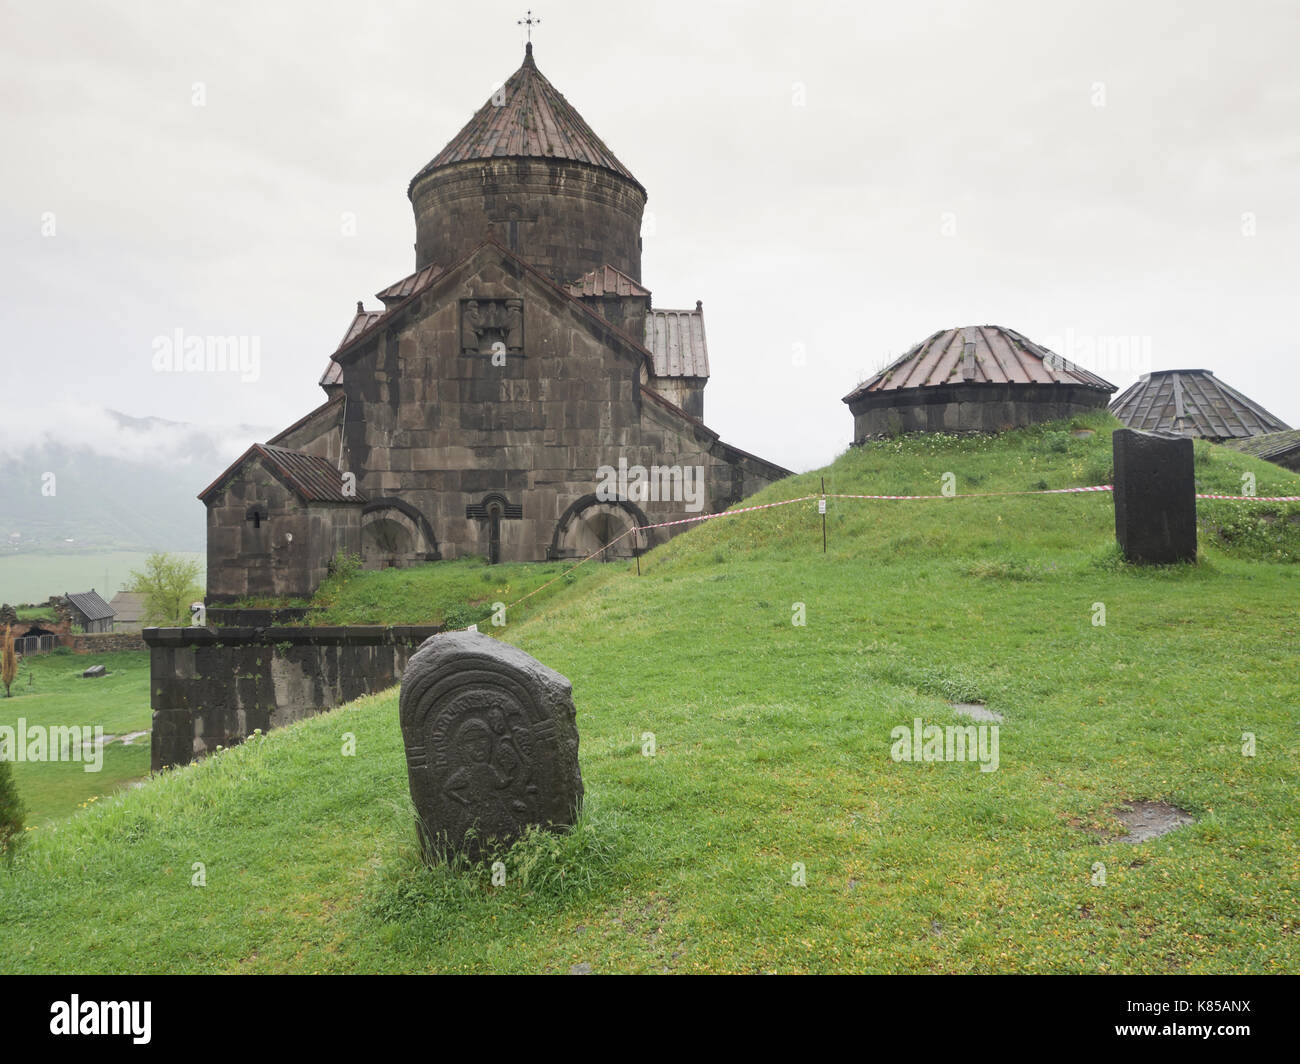 Haghpat Monastery or Haghpatavank in northern Armenia dating back to ca. 976 AD, a Unesco world heritage site Stock Photo